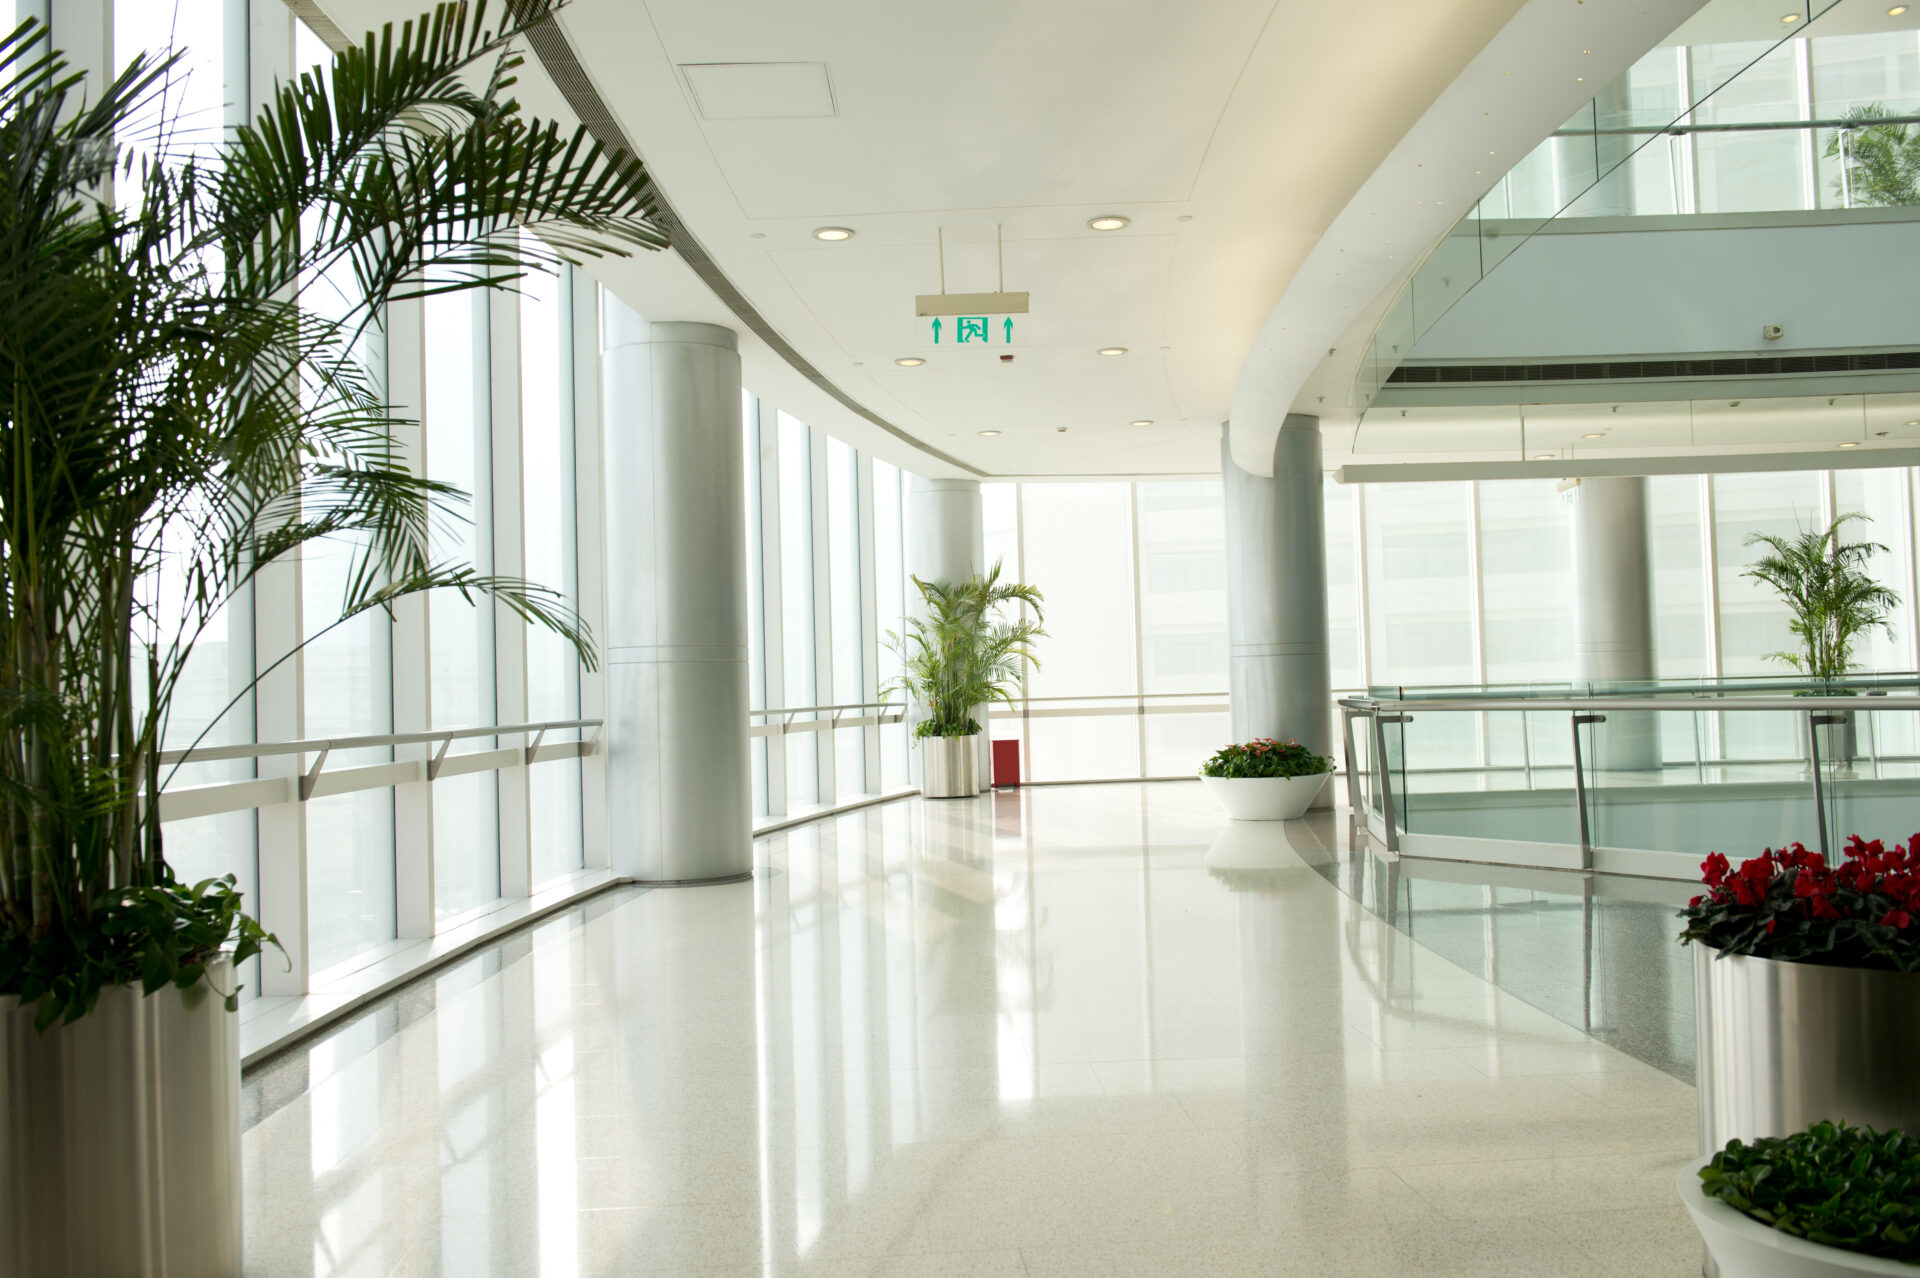 Clean, minimalistic style corridor in a modern and bright office building, showcasing mirror-shined tile flooring.